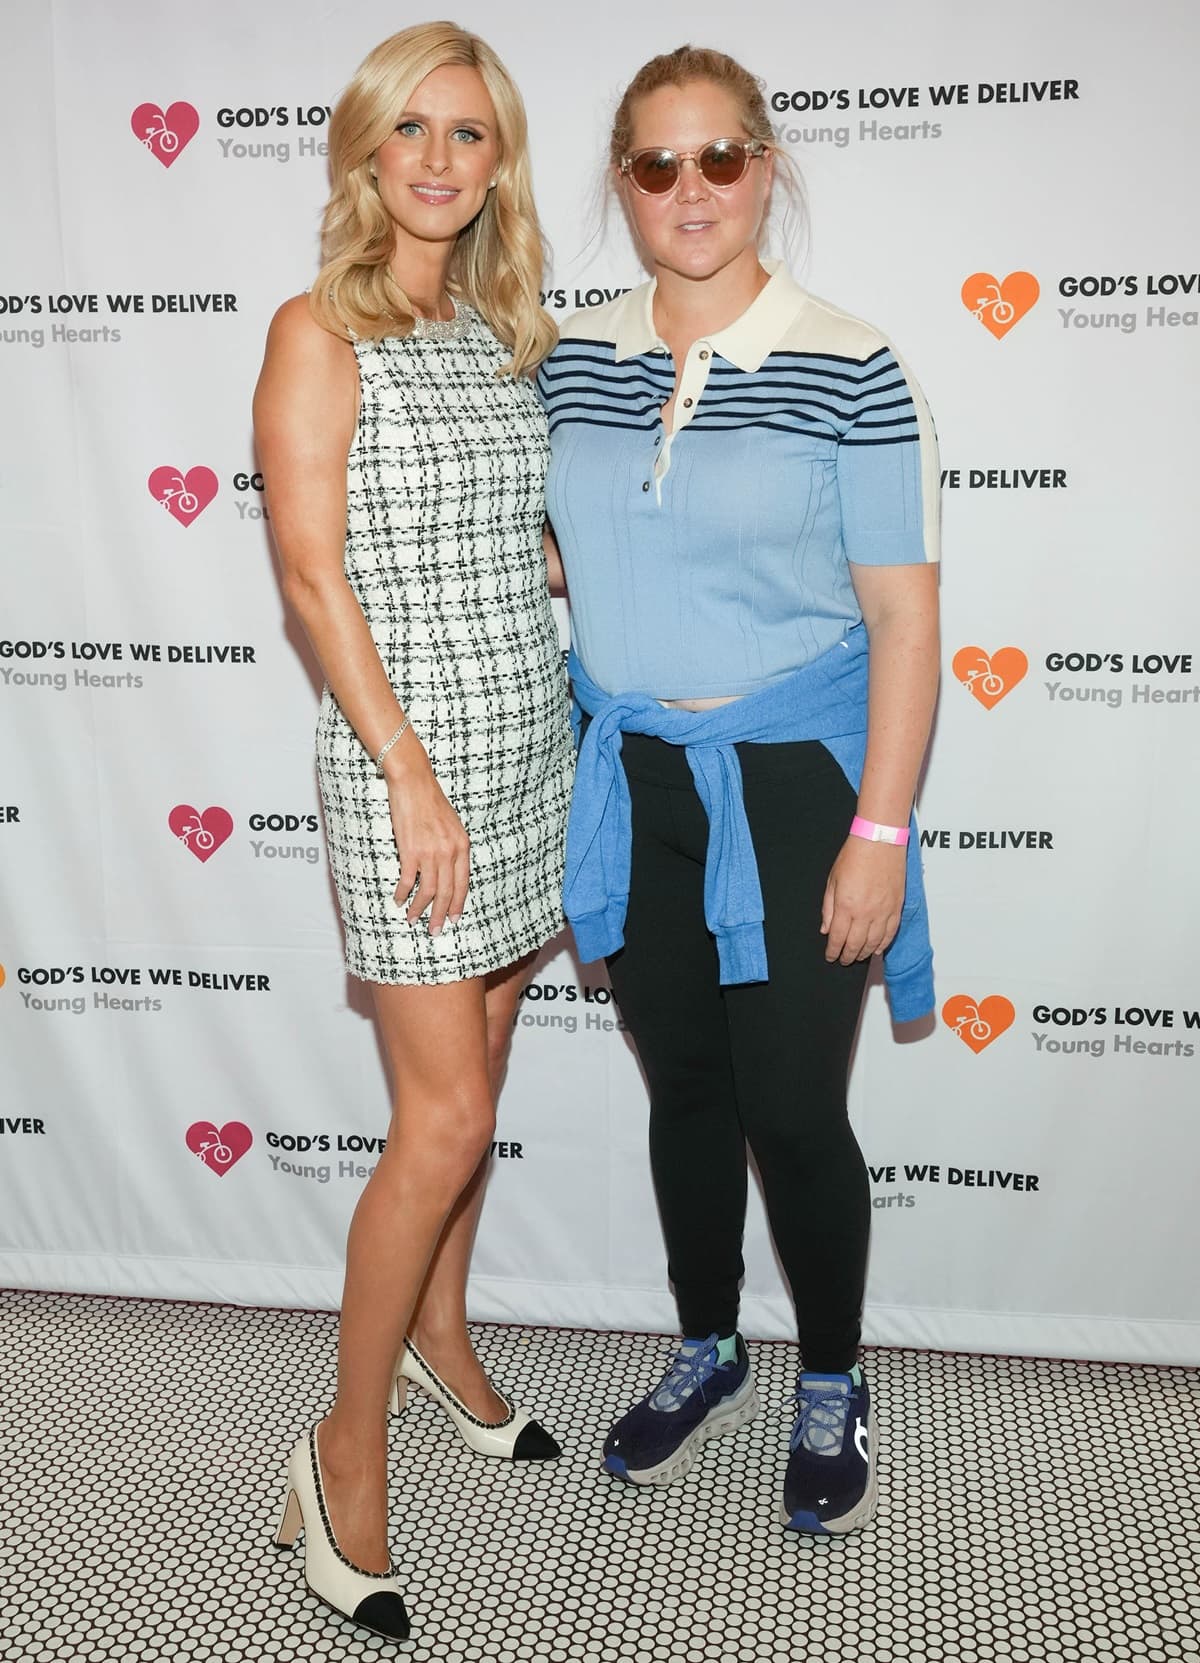 Although both Nicky Rothschild and Amy Schumer are 5′ 7″ (1.70 m), Nicky appeared taller when wearing heels at The Museum Of Ice Cream's Inaugural Young Hearts Friends Fest Ice Cream Social